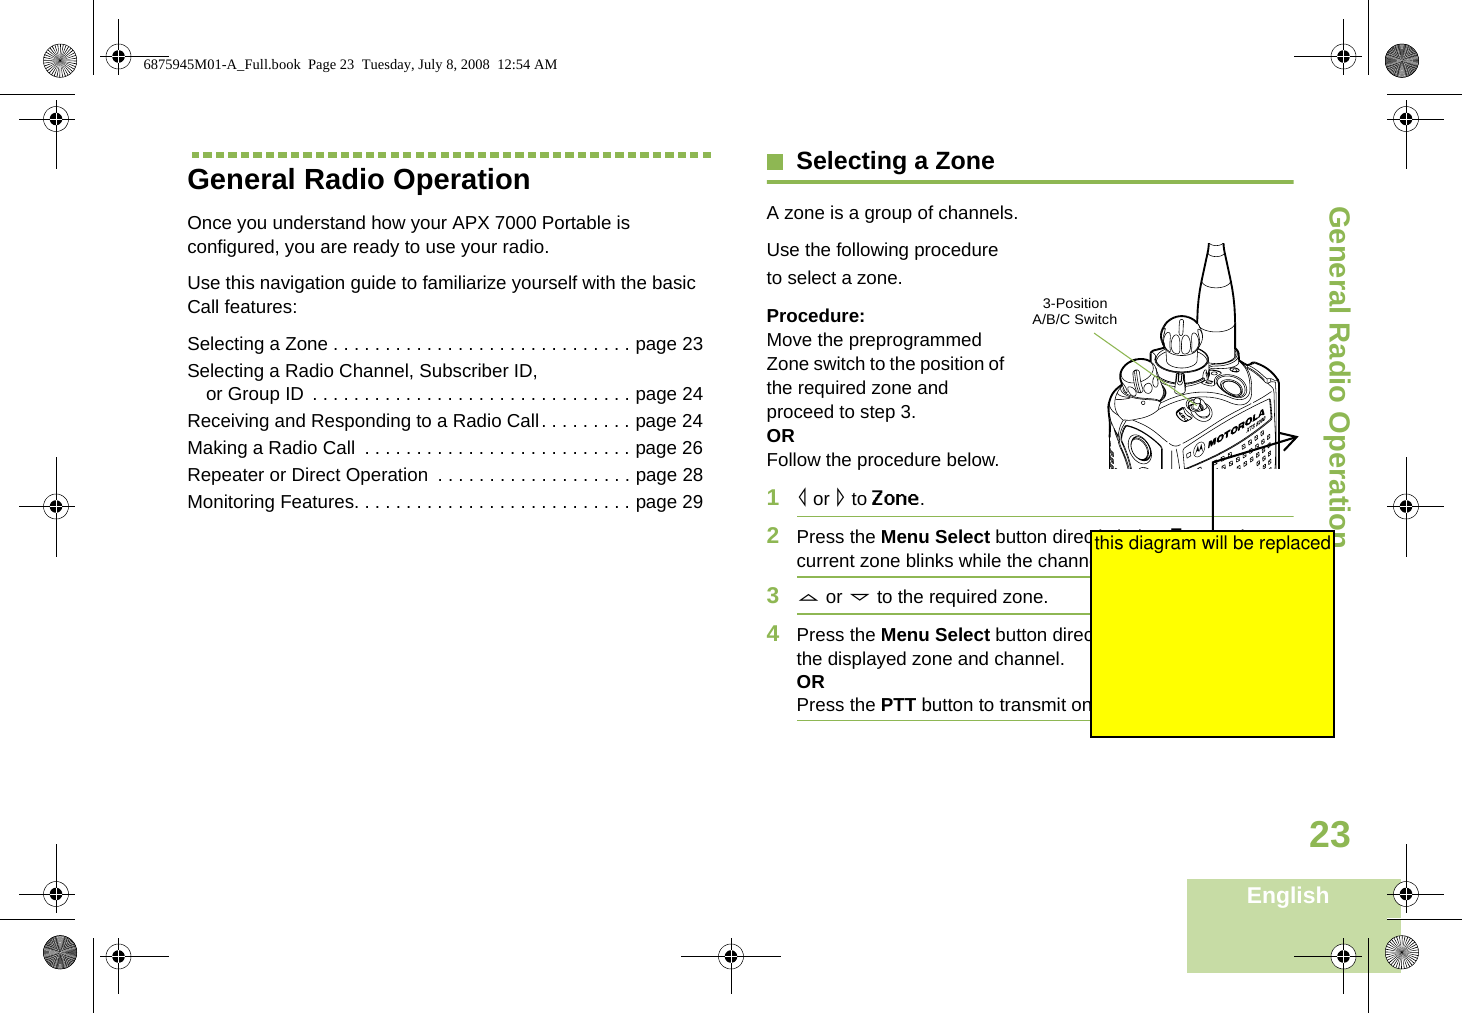 General Radio OperationEnglish23General Radio OperationOnce you understand how your APX 7000 Portable is configured, you are ready to use your radio.Use this navigation guide to familiarize yourself with the basic Call features:Selecting a Zone . . . . . . . . . . . . . . . . . . . . . . . . . . . . . page 23Selecting a Radio Channel, Subscriber ID, or Group ID . . . . . . . . . . . . . . . . . . . . . . . . . . . . . . . page 24Receiving and Responding to a Radio Call. . . . . . . . . page 24Making a Radio Call  . . . . . . . . . . . . . . . . . . . . . . . . . . page 26Repeater or Direct Operation  . . . . . . . . . . . . . . . . . . . page 28Monitoring Features. . . . . . . . . . . . . . . . . . . . . . . . . . . page 29Selecting a ZoneA zone is a group of channels. Use the following procedure to select a zone.Procedure:Move the preprogrammed Zone switch to the position of the required zone and proceed to step 3.ORFollow the procedure below.1&lt; or &gt; to Zone.2Press the Menu Select button directly below Zone. The current zone blinks while the channel name remains steady.3U or D to the required zone. 4Press the Menu Select button directly below Sel to confirm the displayed zone and channel. ORPress the PTT button to transmit on the displayed zone. 3-Position  A/B/C Switch6875945M01-A_Full.book  Page 23  Tuesday, July 8, 2008  12:54 AMthis diagram will be replaced